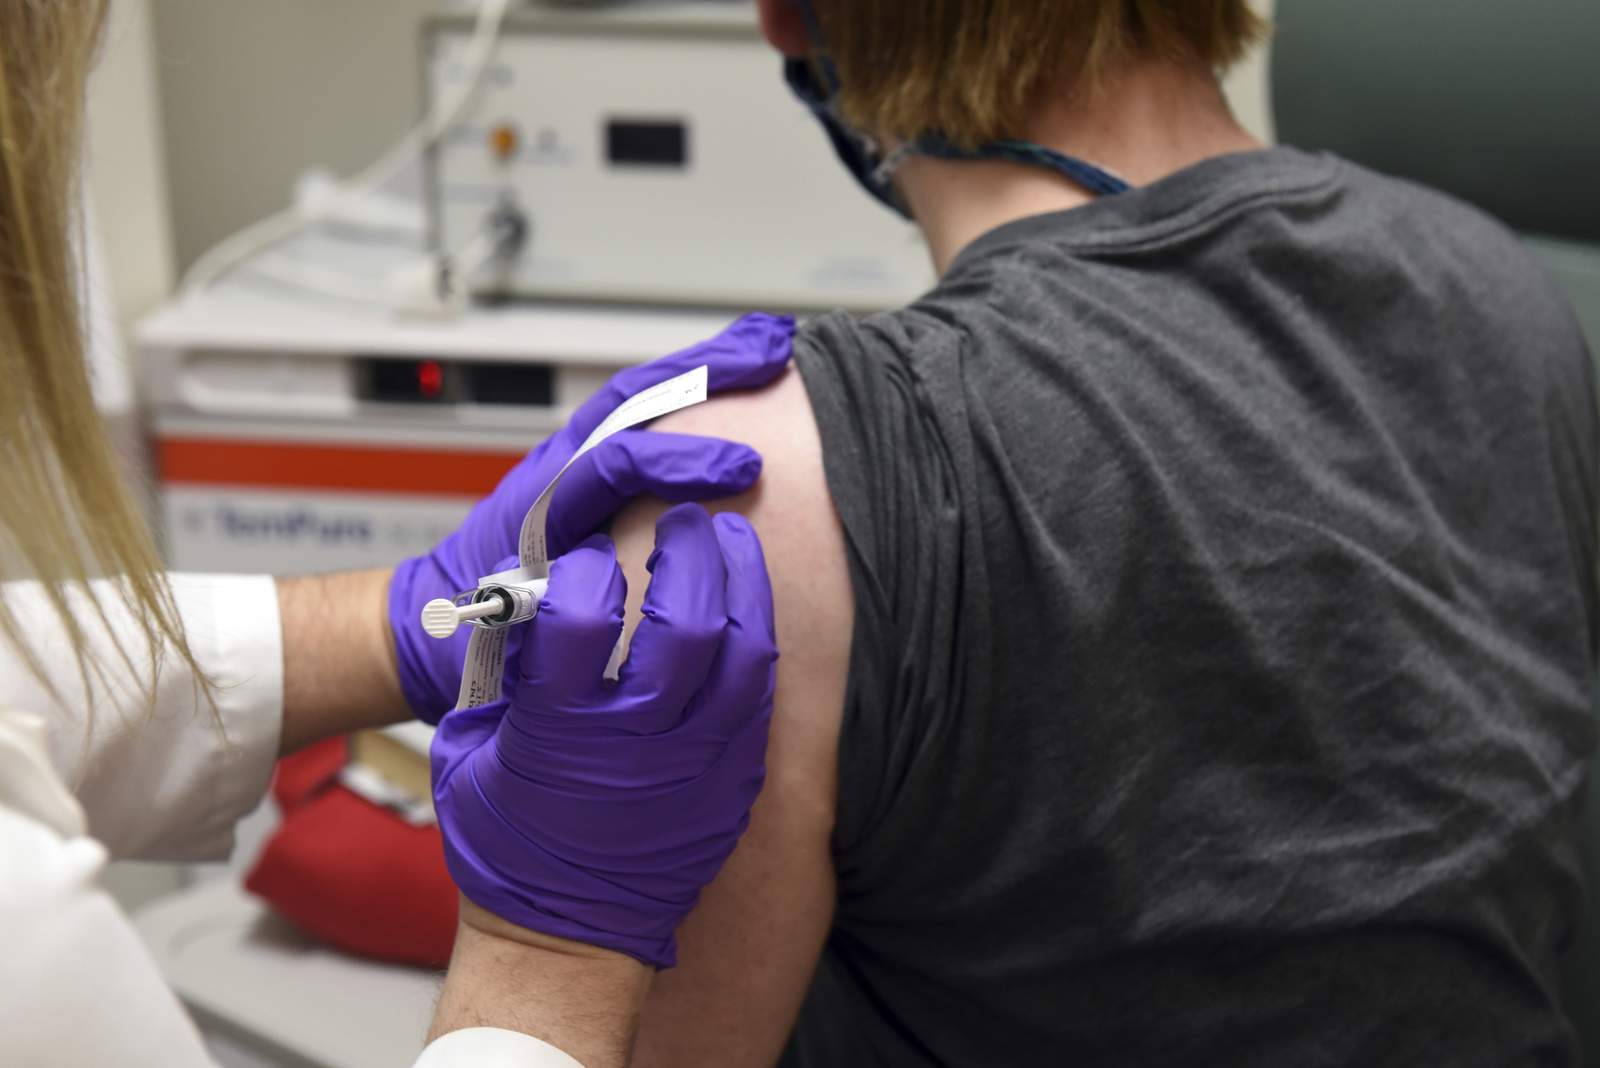 Pentagon set to begin COVID-19 vaccinations on small scale